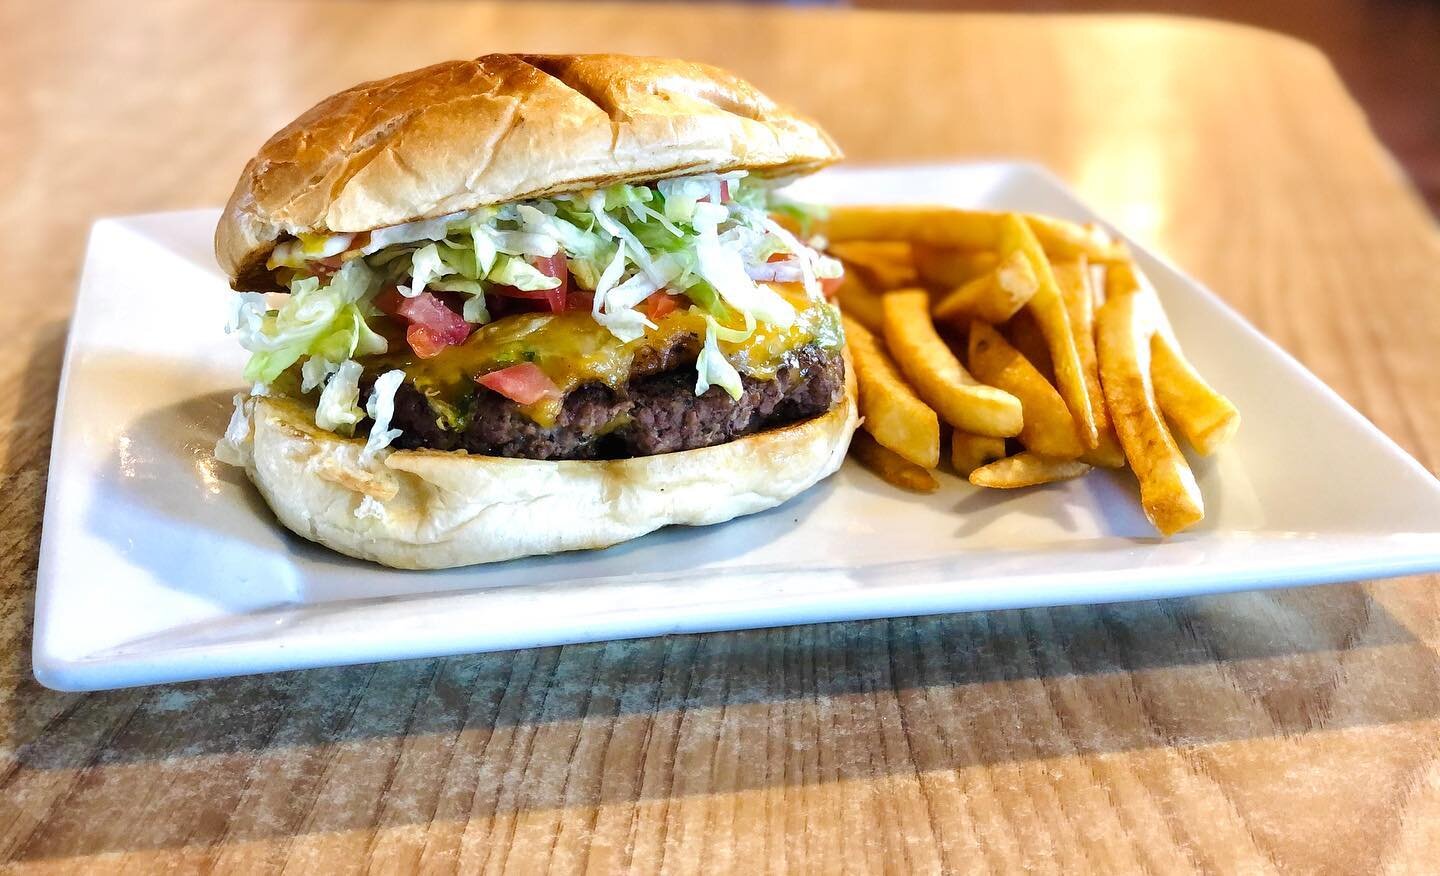 Come Try Our 1/2 Torta Burger!!
We Are Open For Dine-in and Takeout!
Call Us At (520)748-1032!